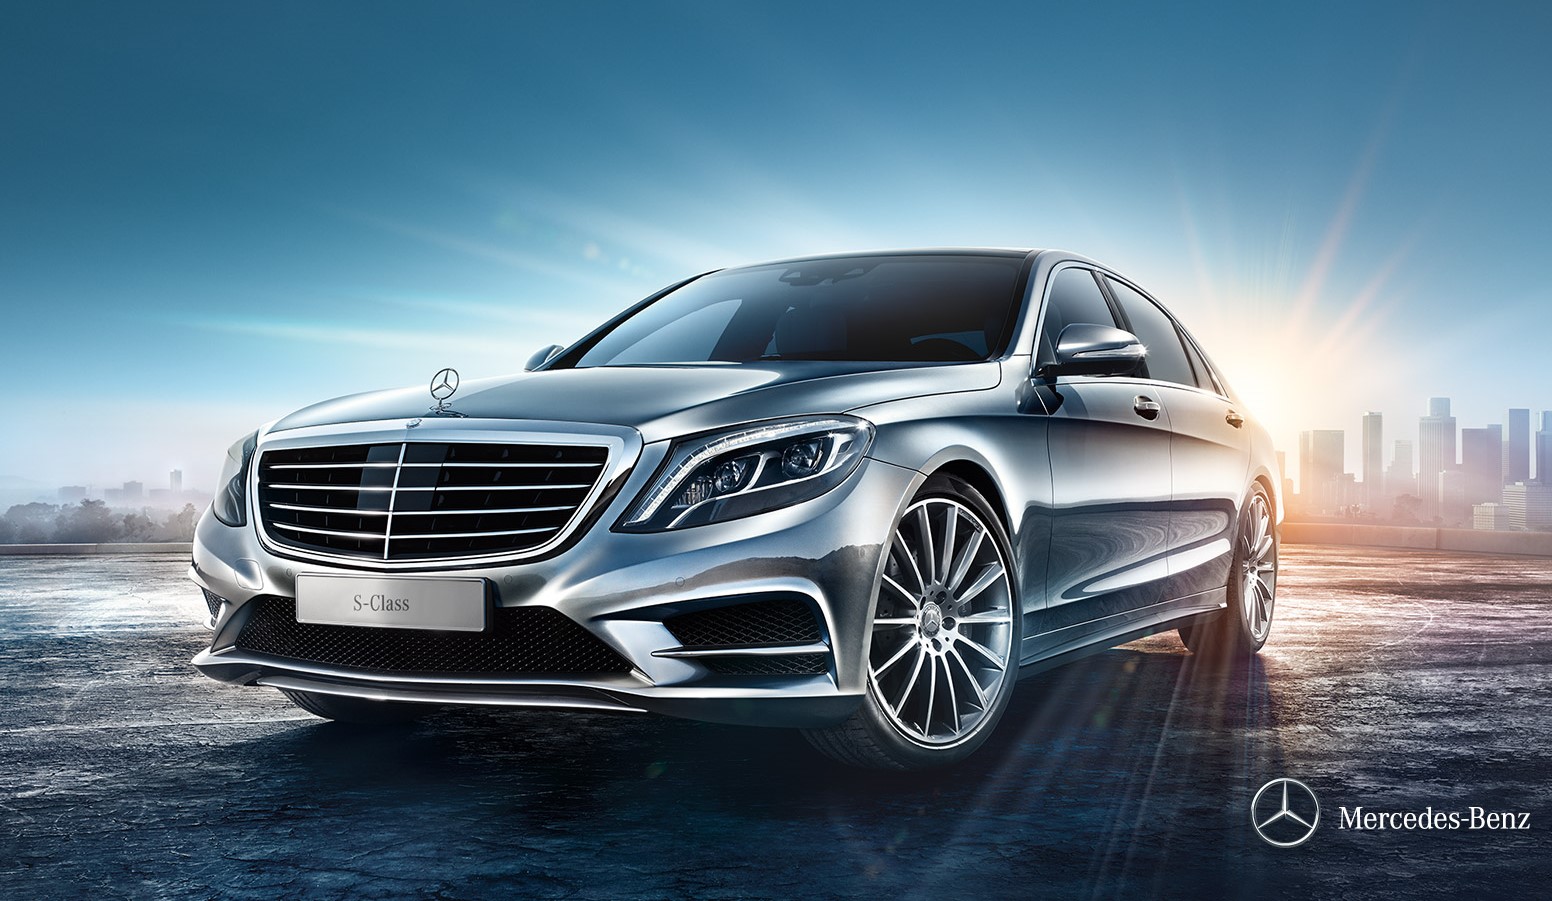 Mercedes Benz S-Class S400 Launched in India @ INR 1.31 Crore